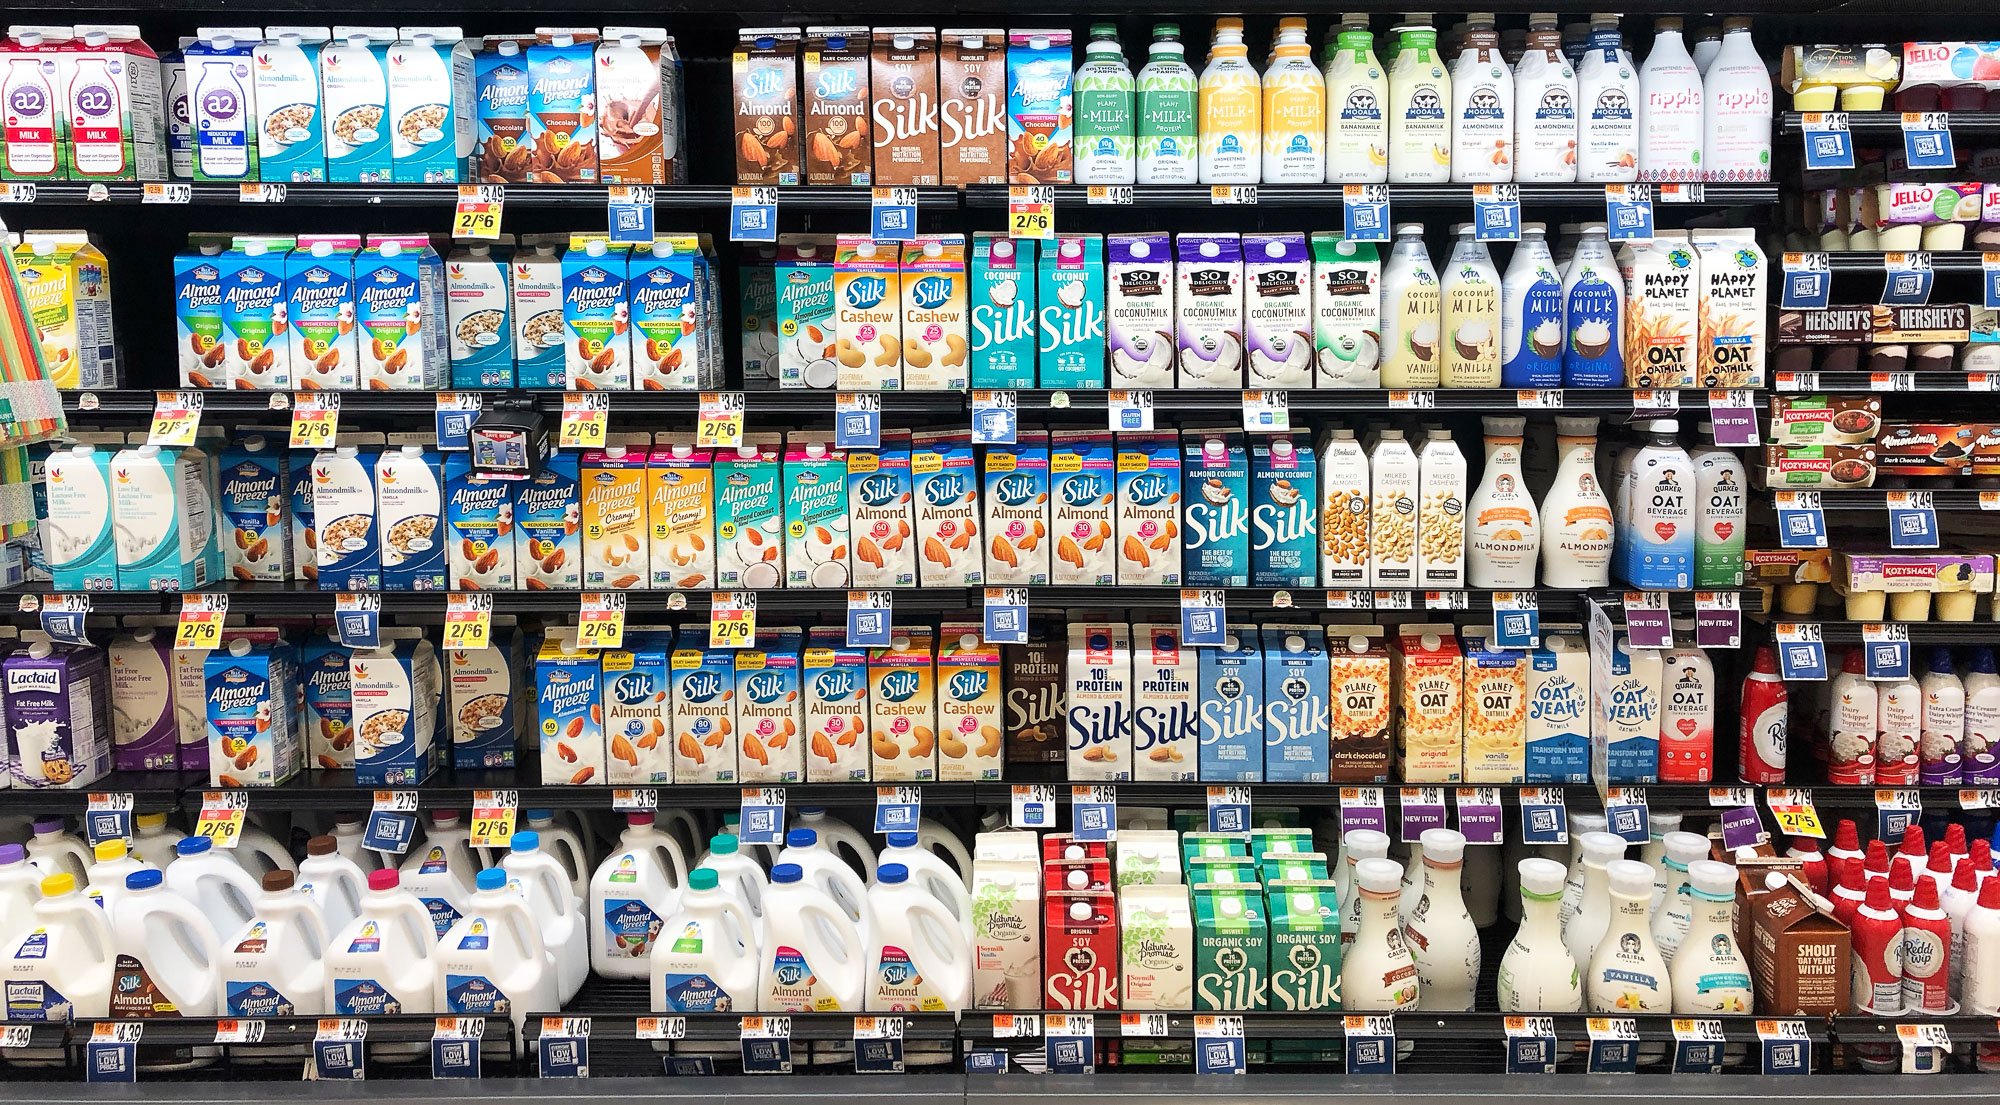 Plant-based milk is merchandised next to cow-based milk at giant foods.